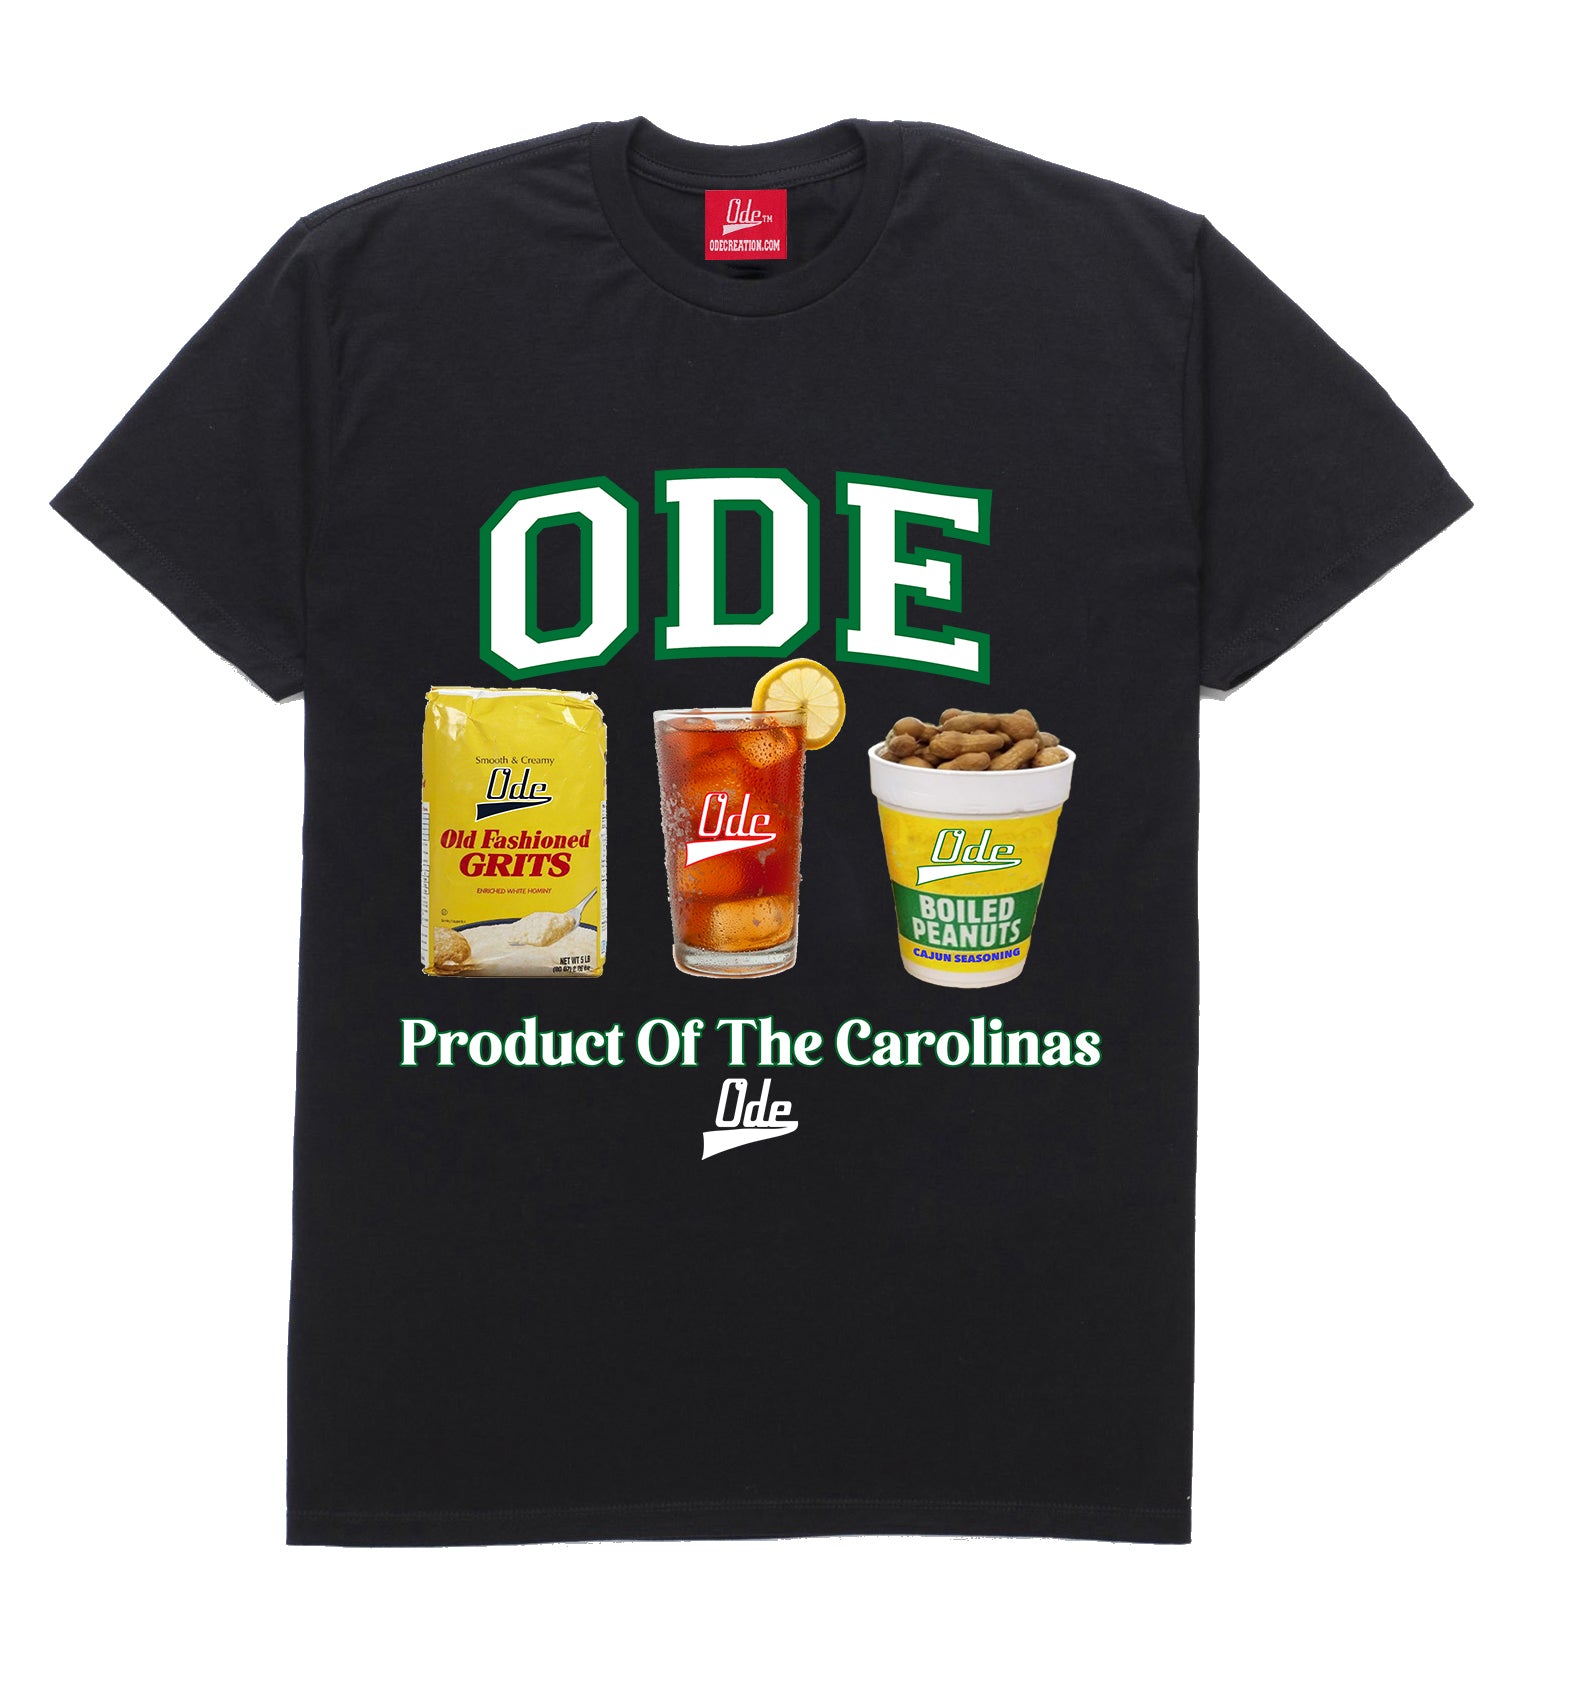 The Ode Product Of The Carolinas T-Shirt/ Black